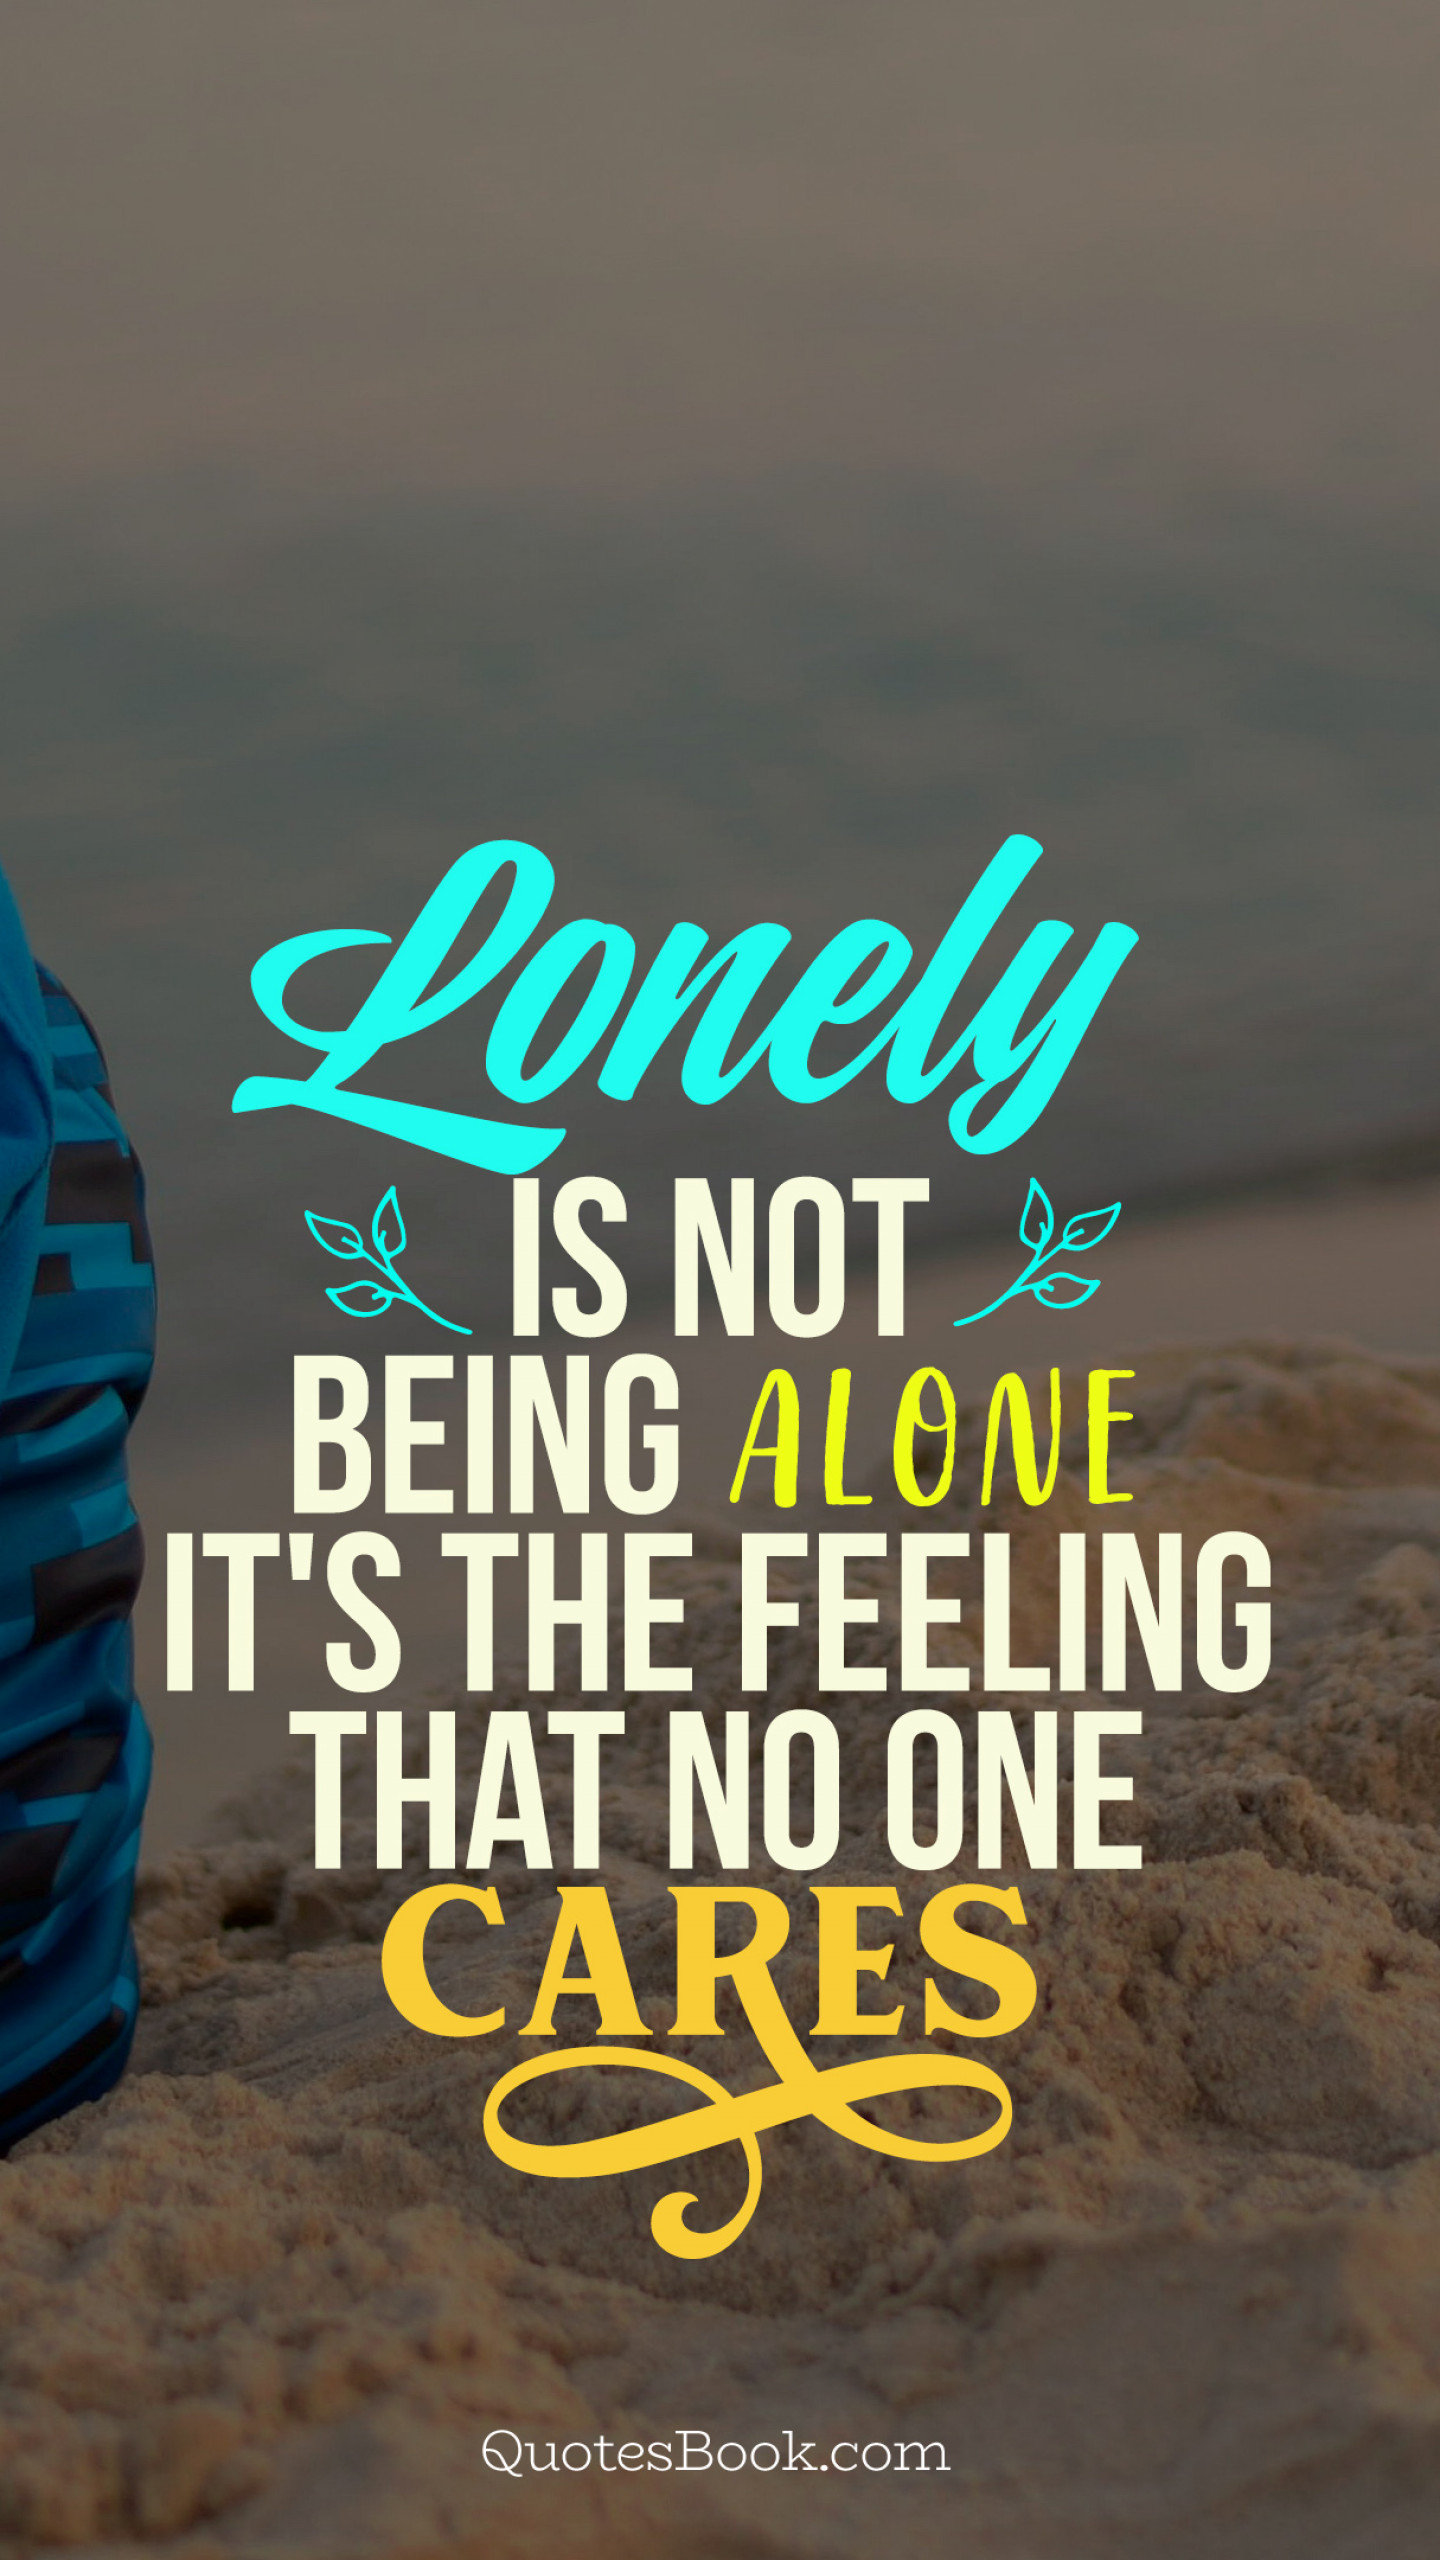 lonely is not being alone it's the feeling that no one cares - QuotesBook